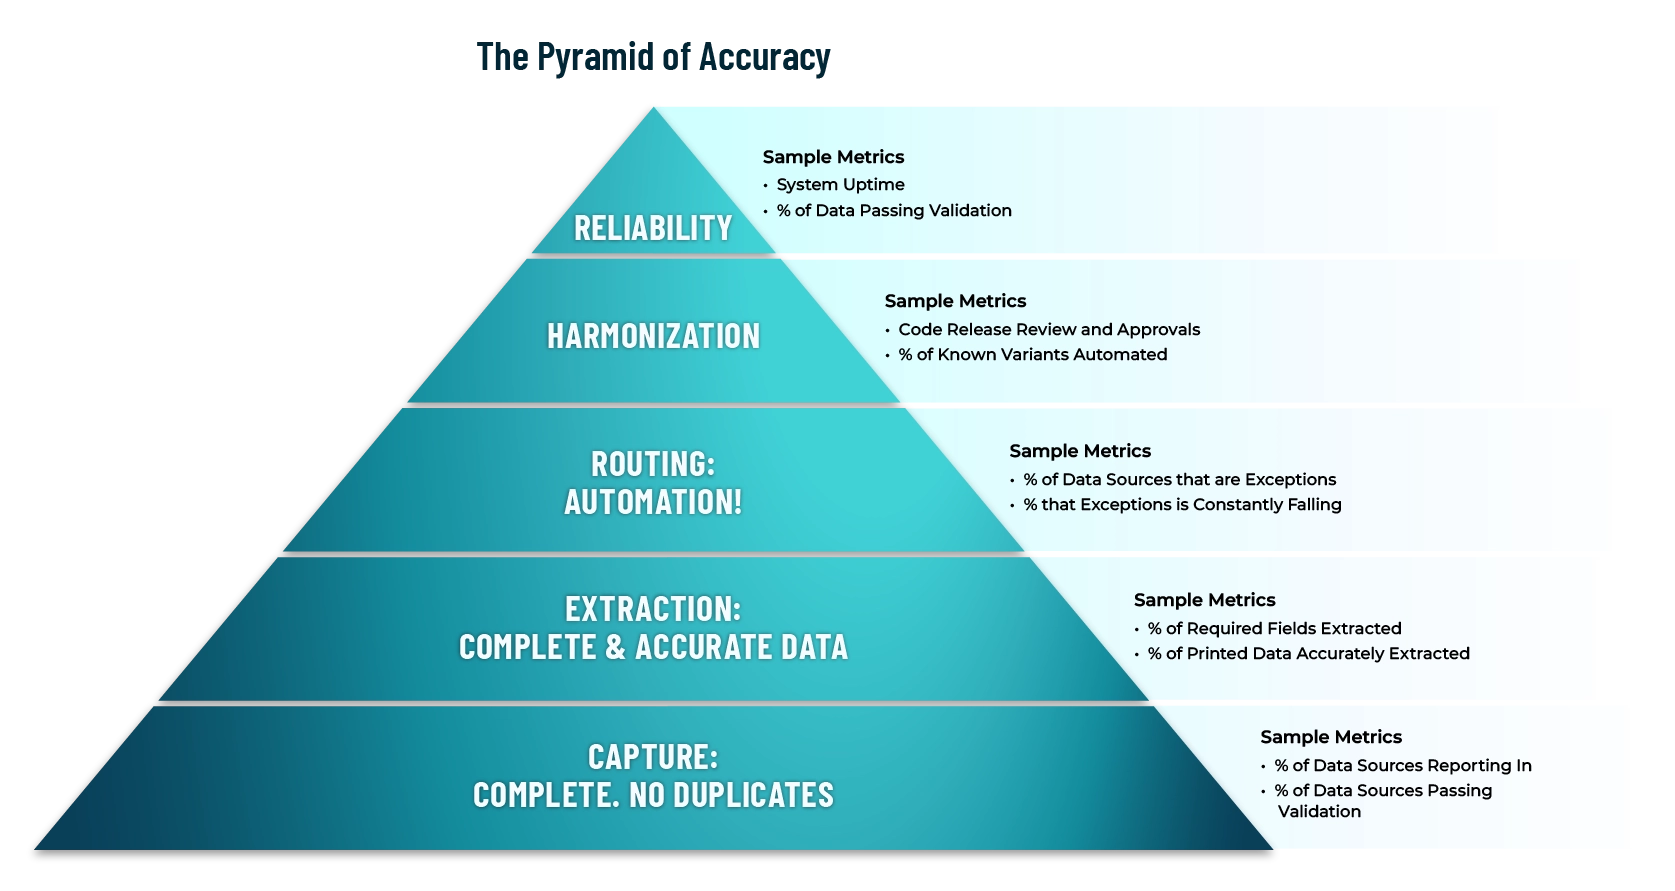 A pyramid broken into 5 levels. Level 5 (bottom) is "Capture: Complete, No Duplicates." Level 4 is "Extraction: Complete & Accurate Data." Level 3 is "Routing: Automation!" Level 2 is "Harmonization." Level 1 (top) is "Reliability."